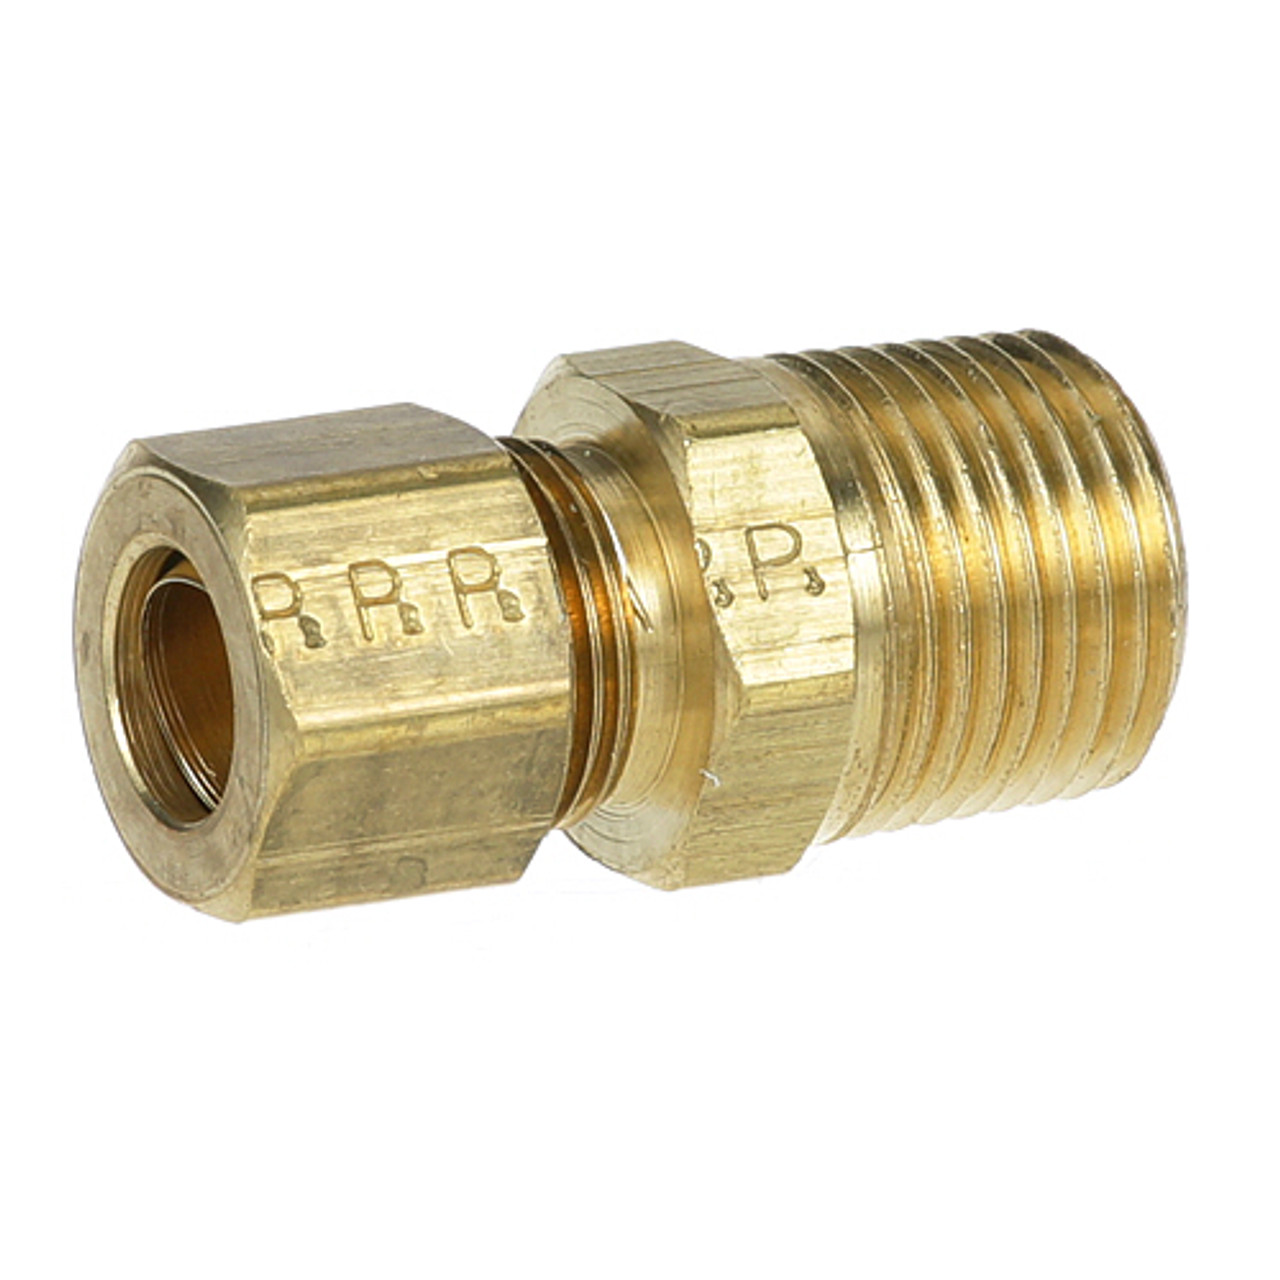 Male Connector - Replacement Part For Royal Range 2514